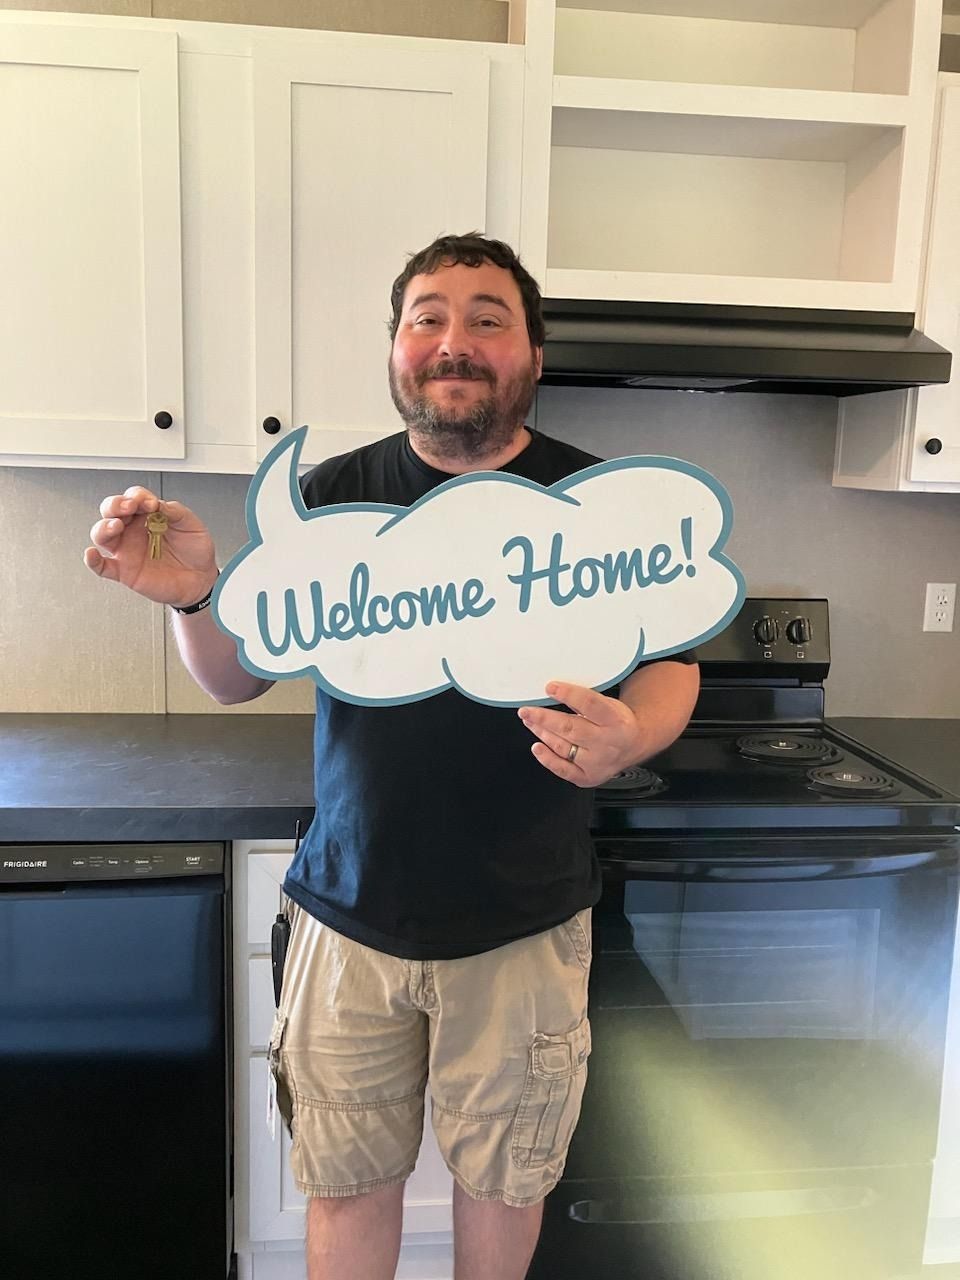 Andrew S. welcome home image